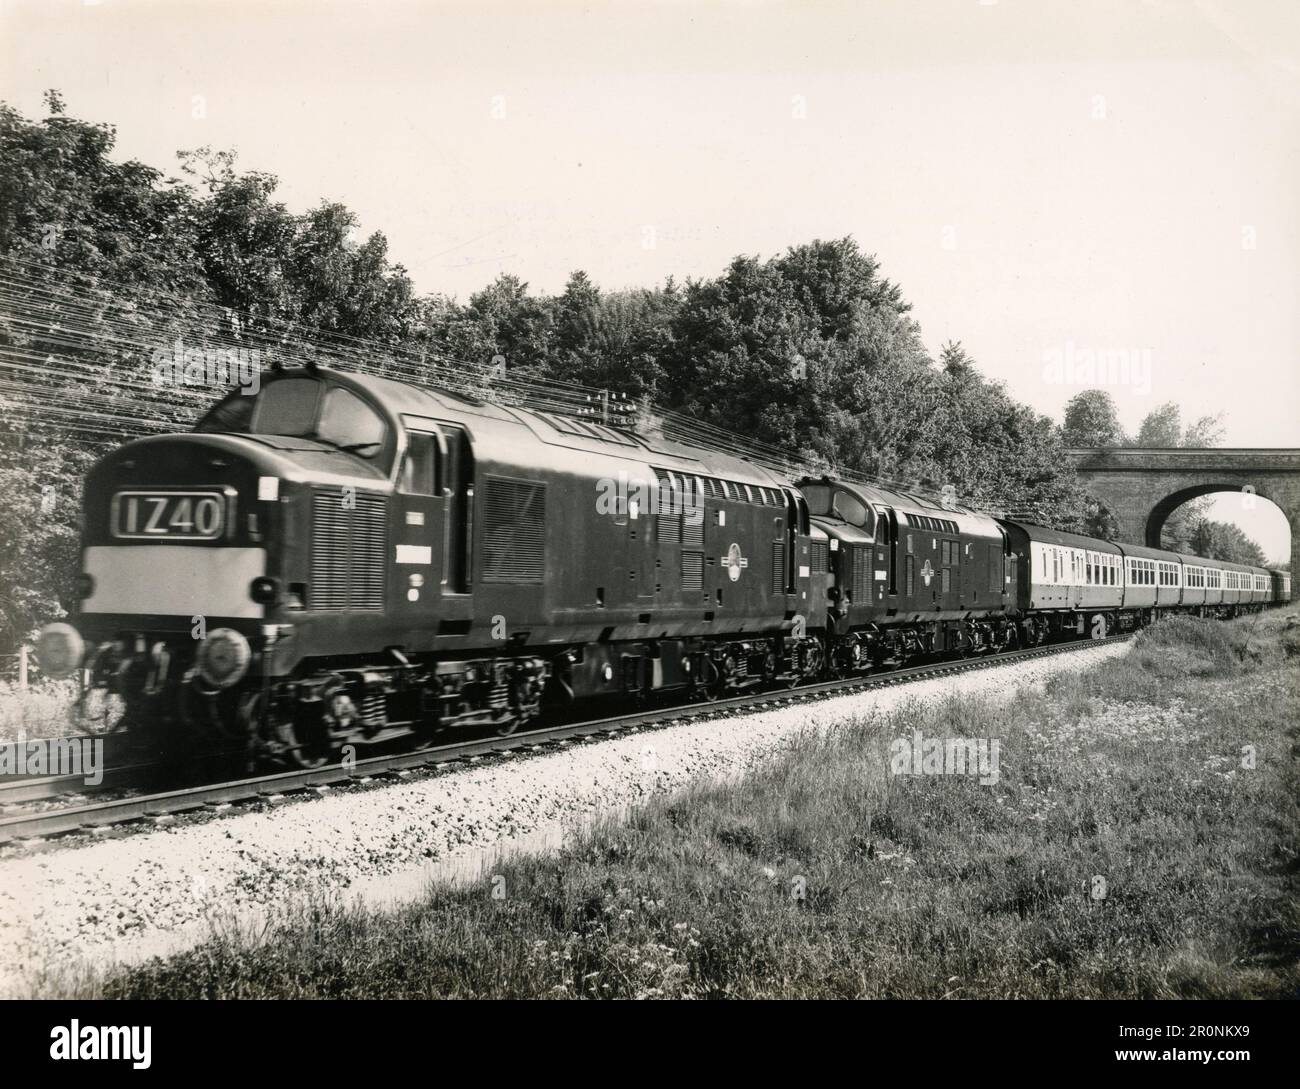 British Rail diesel express train on route between London and Bristol, UK 1966 Stock Photo